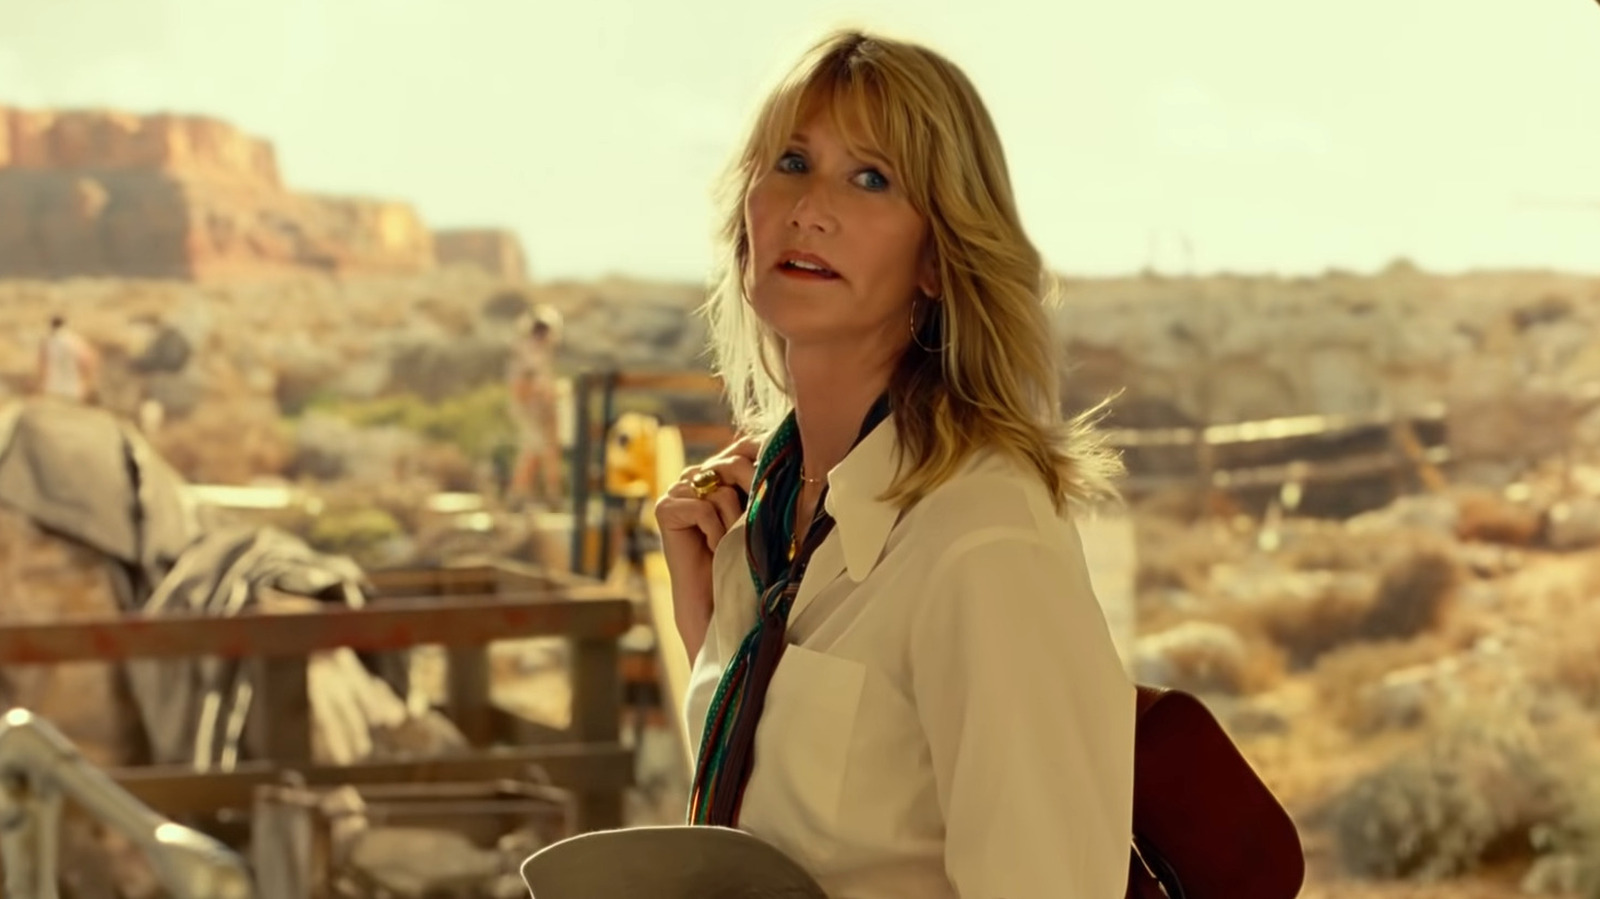 Jurassic World Dominion' Review: Laura Dern and Sam Neill Are Back